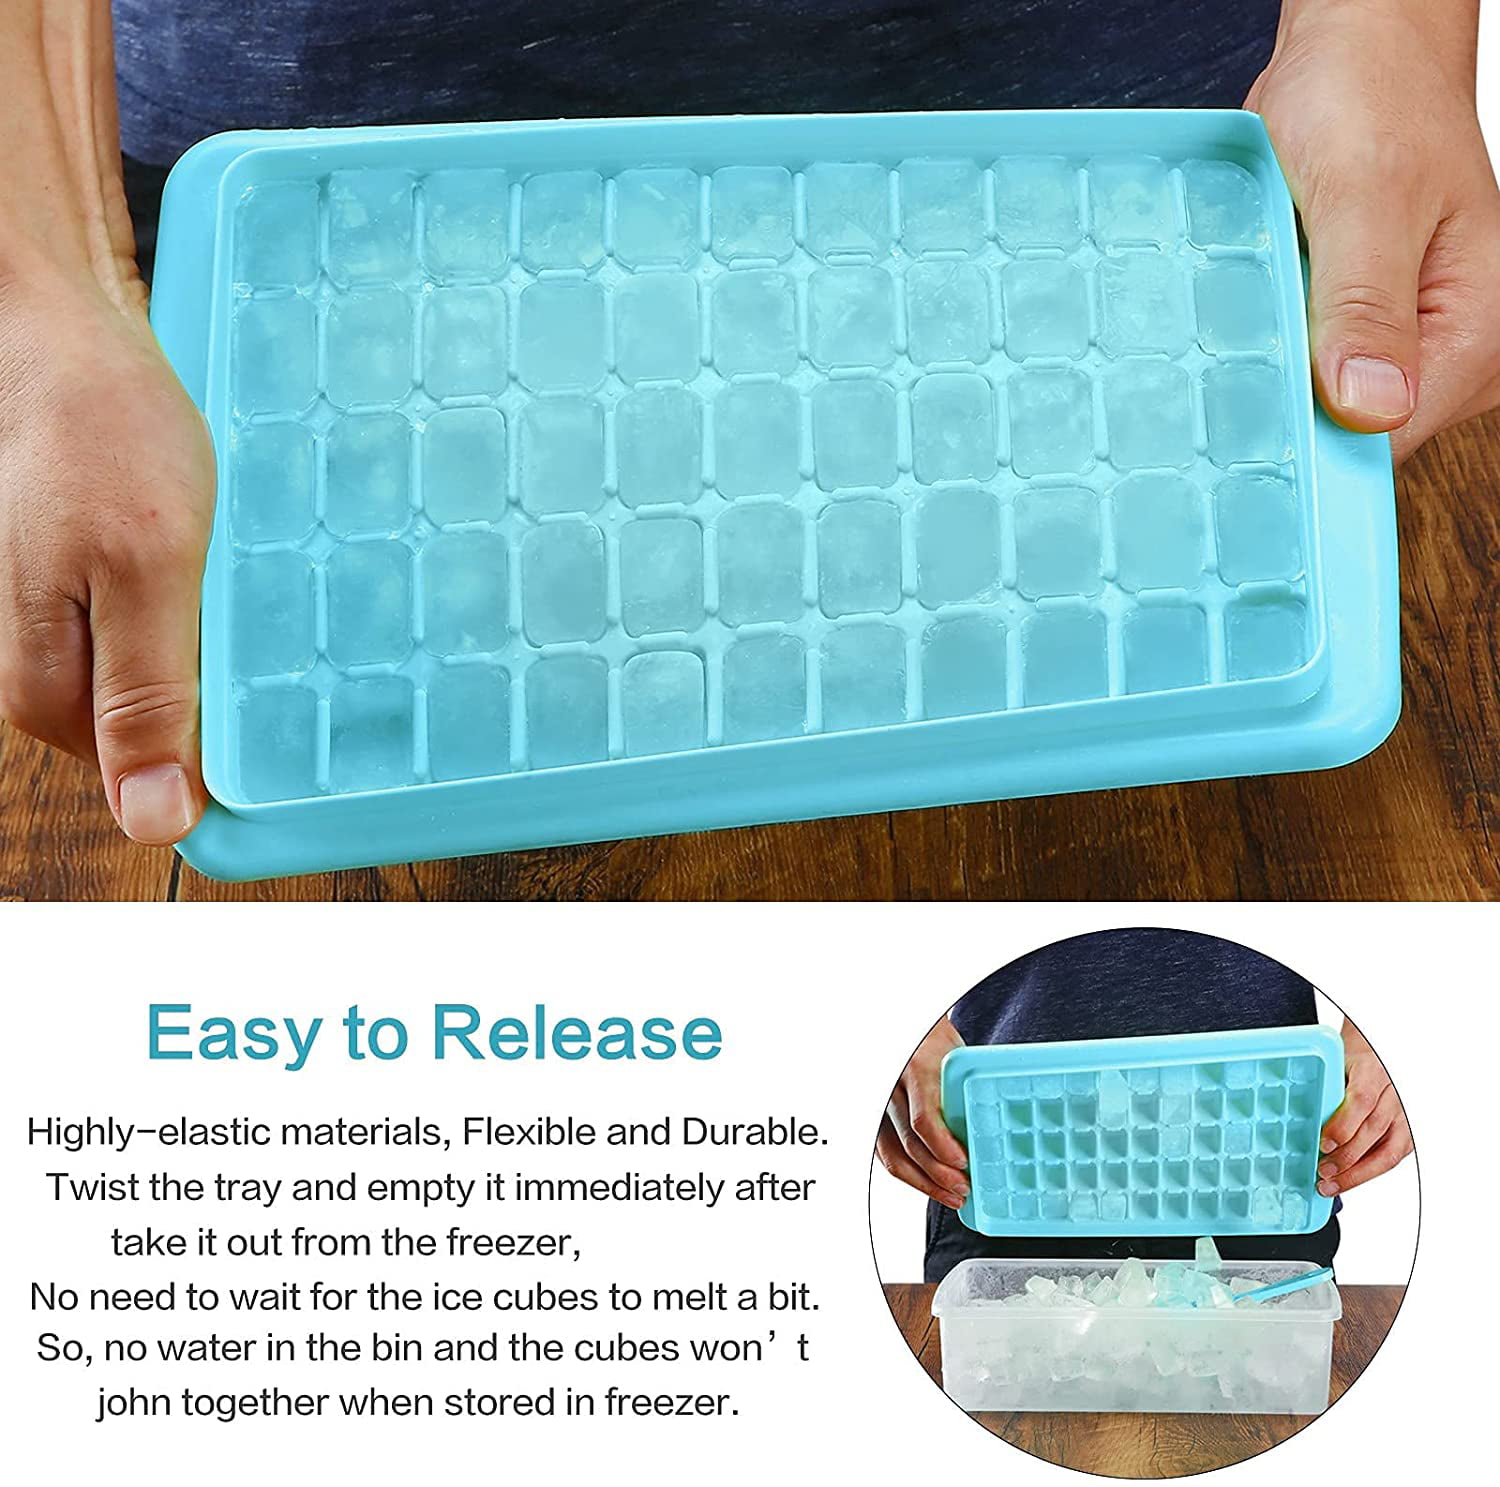 Solacol Ice Cube Tray with Lid and Bin Ice Trays, Ice Cubes Tray with Lid and Bin,32 Pcs Square Ice Cubes Molds with Ice Scoop,Easy Release & Save